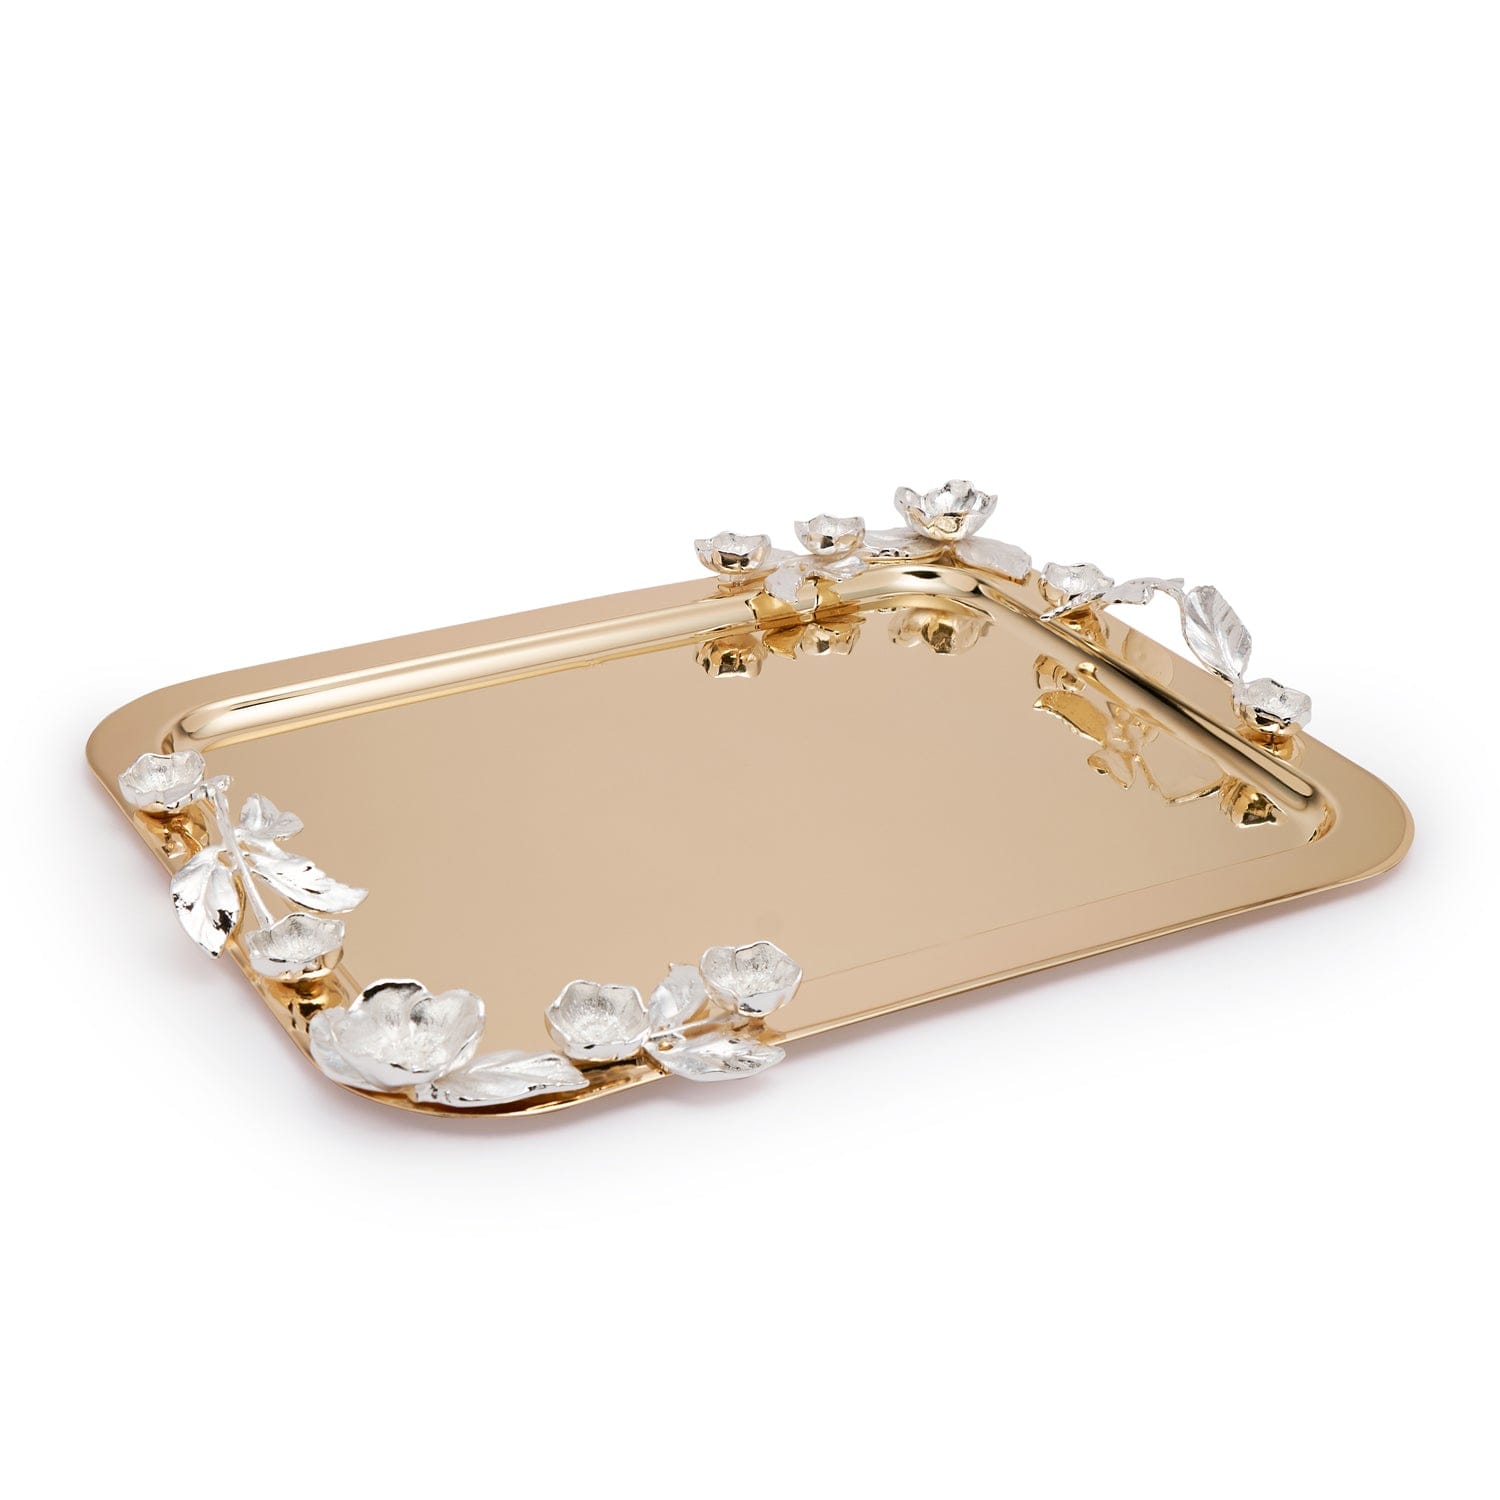 Pantazelos 4 Seasons Of Blossoms Goldplated and Silverplated Rectangular Large Tray - 5545/GPSP